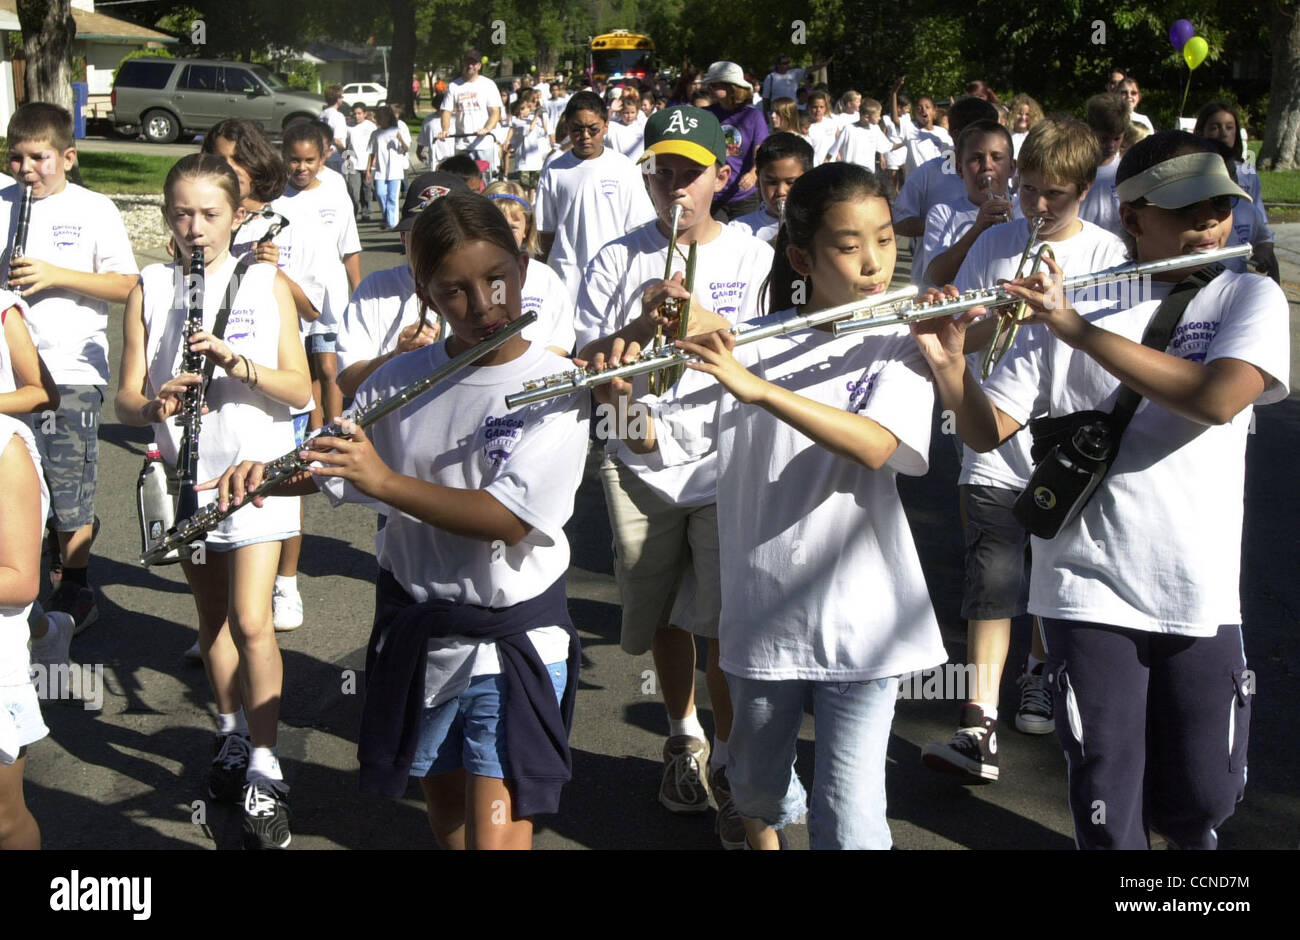 Members Of The Gregory Gardens Elementary School Band March